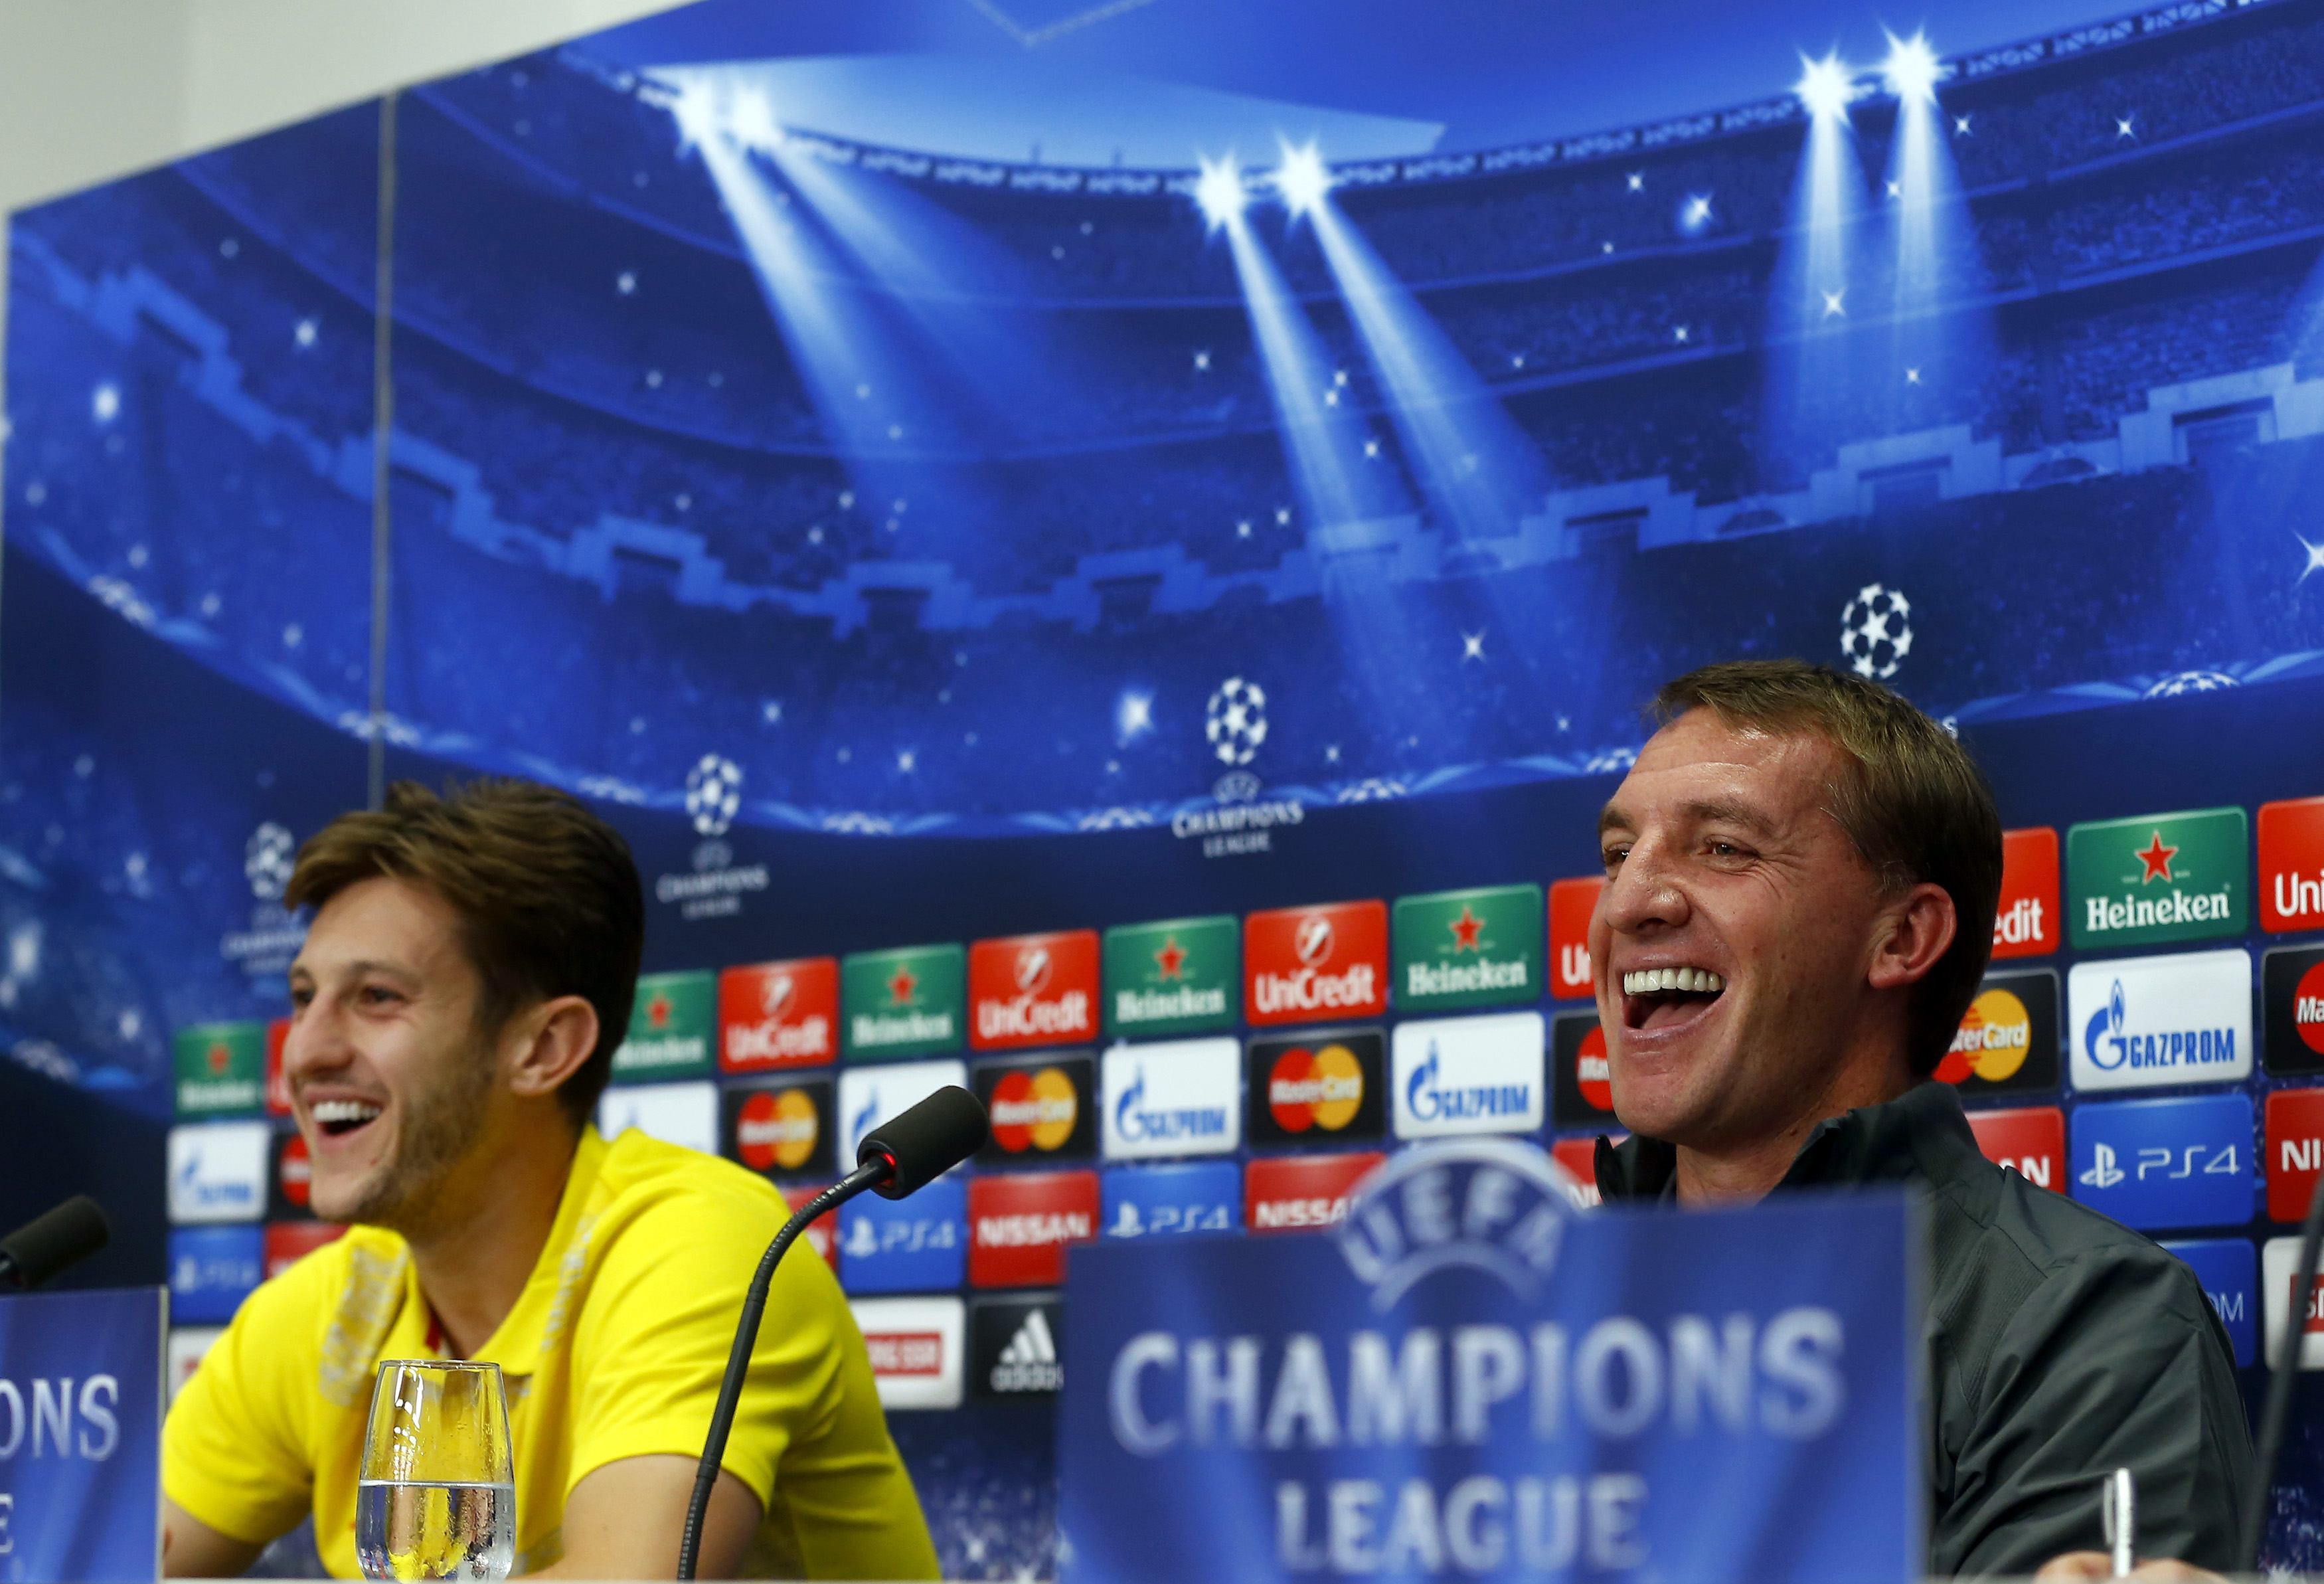 Liverpool's player Adam Lallana and manager Brendan Rodgers (R) smile during a news conference ahead of their Champions League Group B match against FC Basel in Basel September 30, 2014. REUTERS/Arnd Wiegmann (SWITZERLAND - Tags: SPORT SOCCER HEADSHOT)